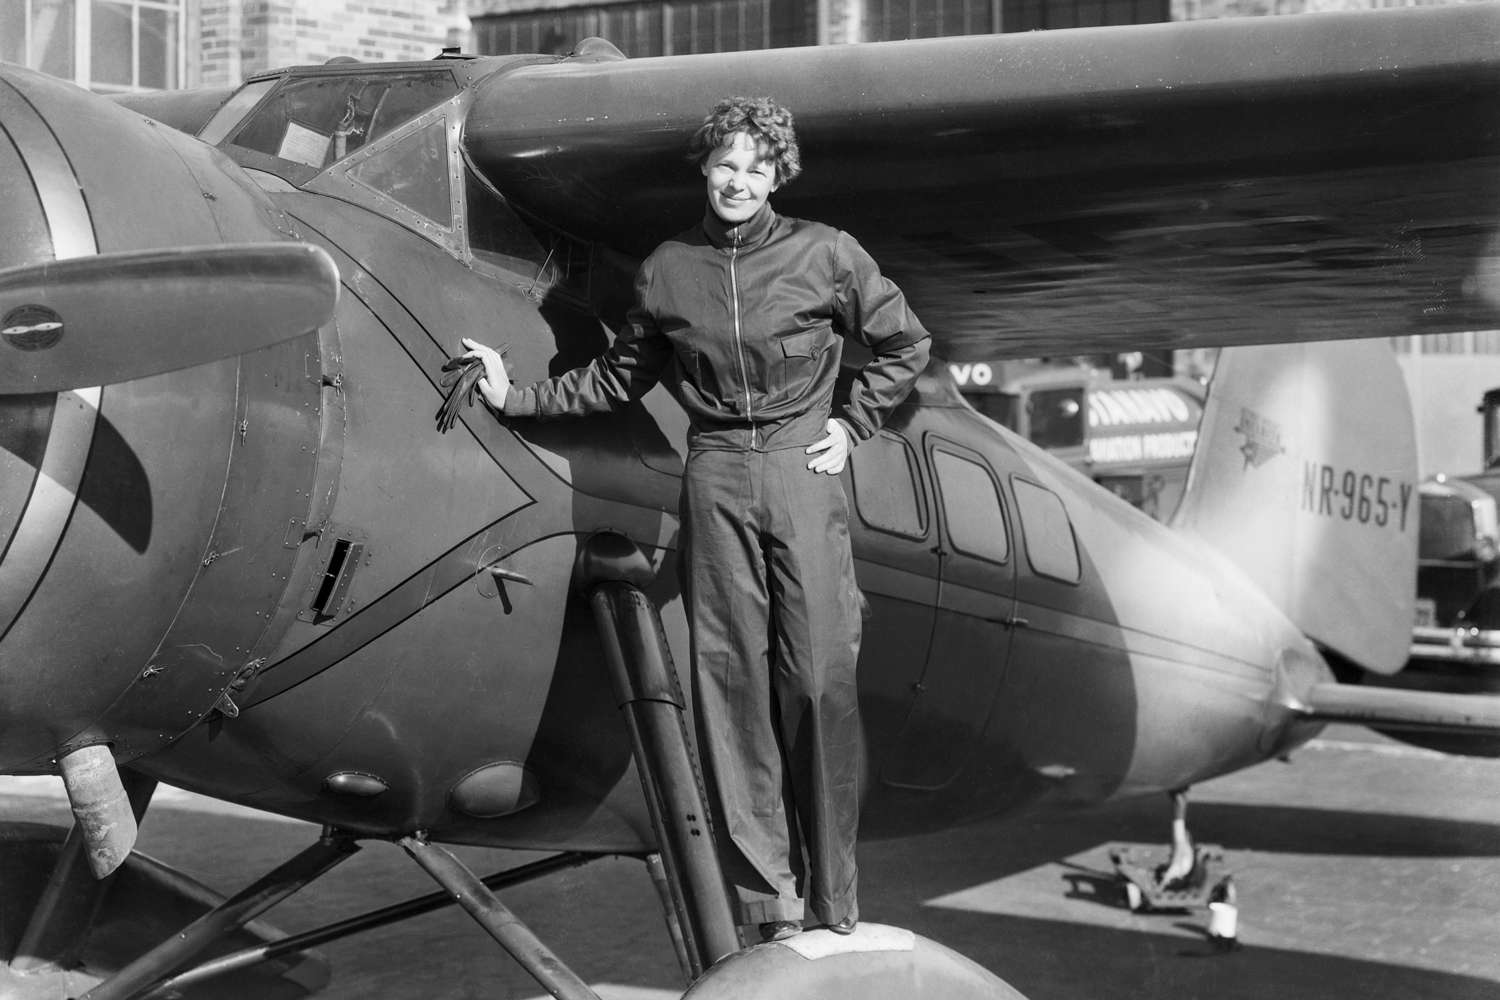 Amelia Earhart's plane, missing in 1937, may have been found in the Pacific Ocean